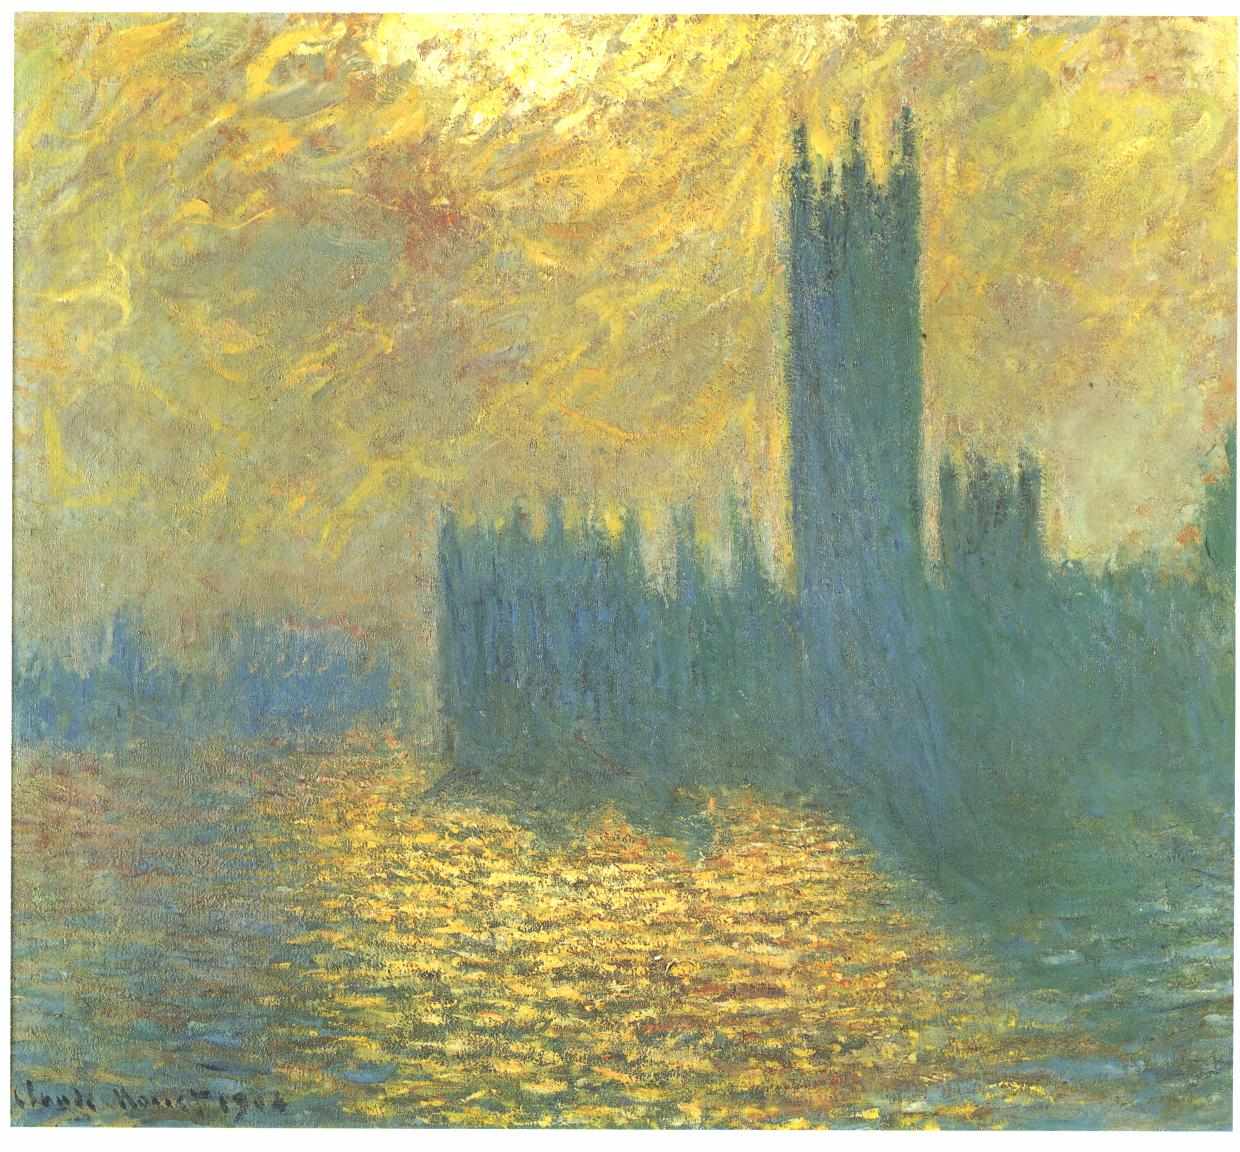 13 Monet_-_Parlament_in_London_-_Stürmischer_Tag_Parliament in London – Stormy day, ca. 1904